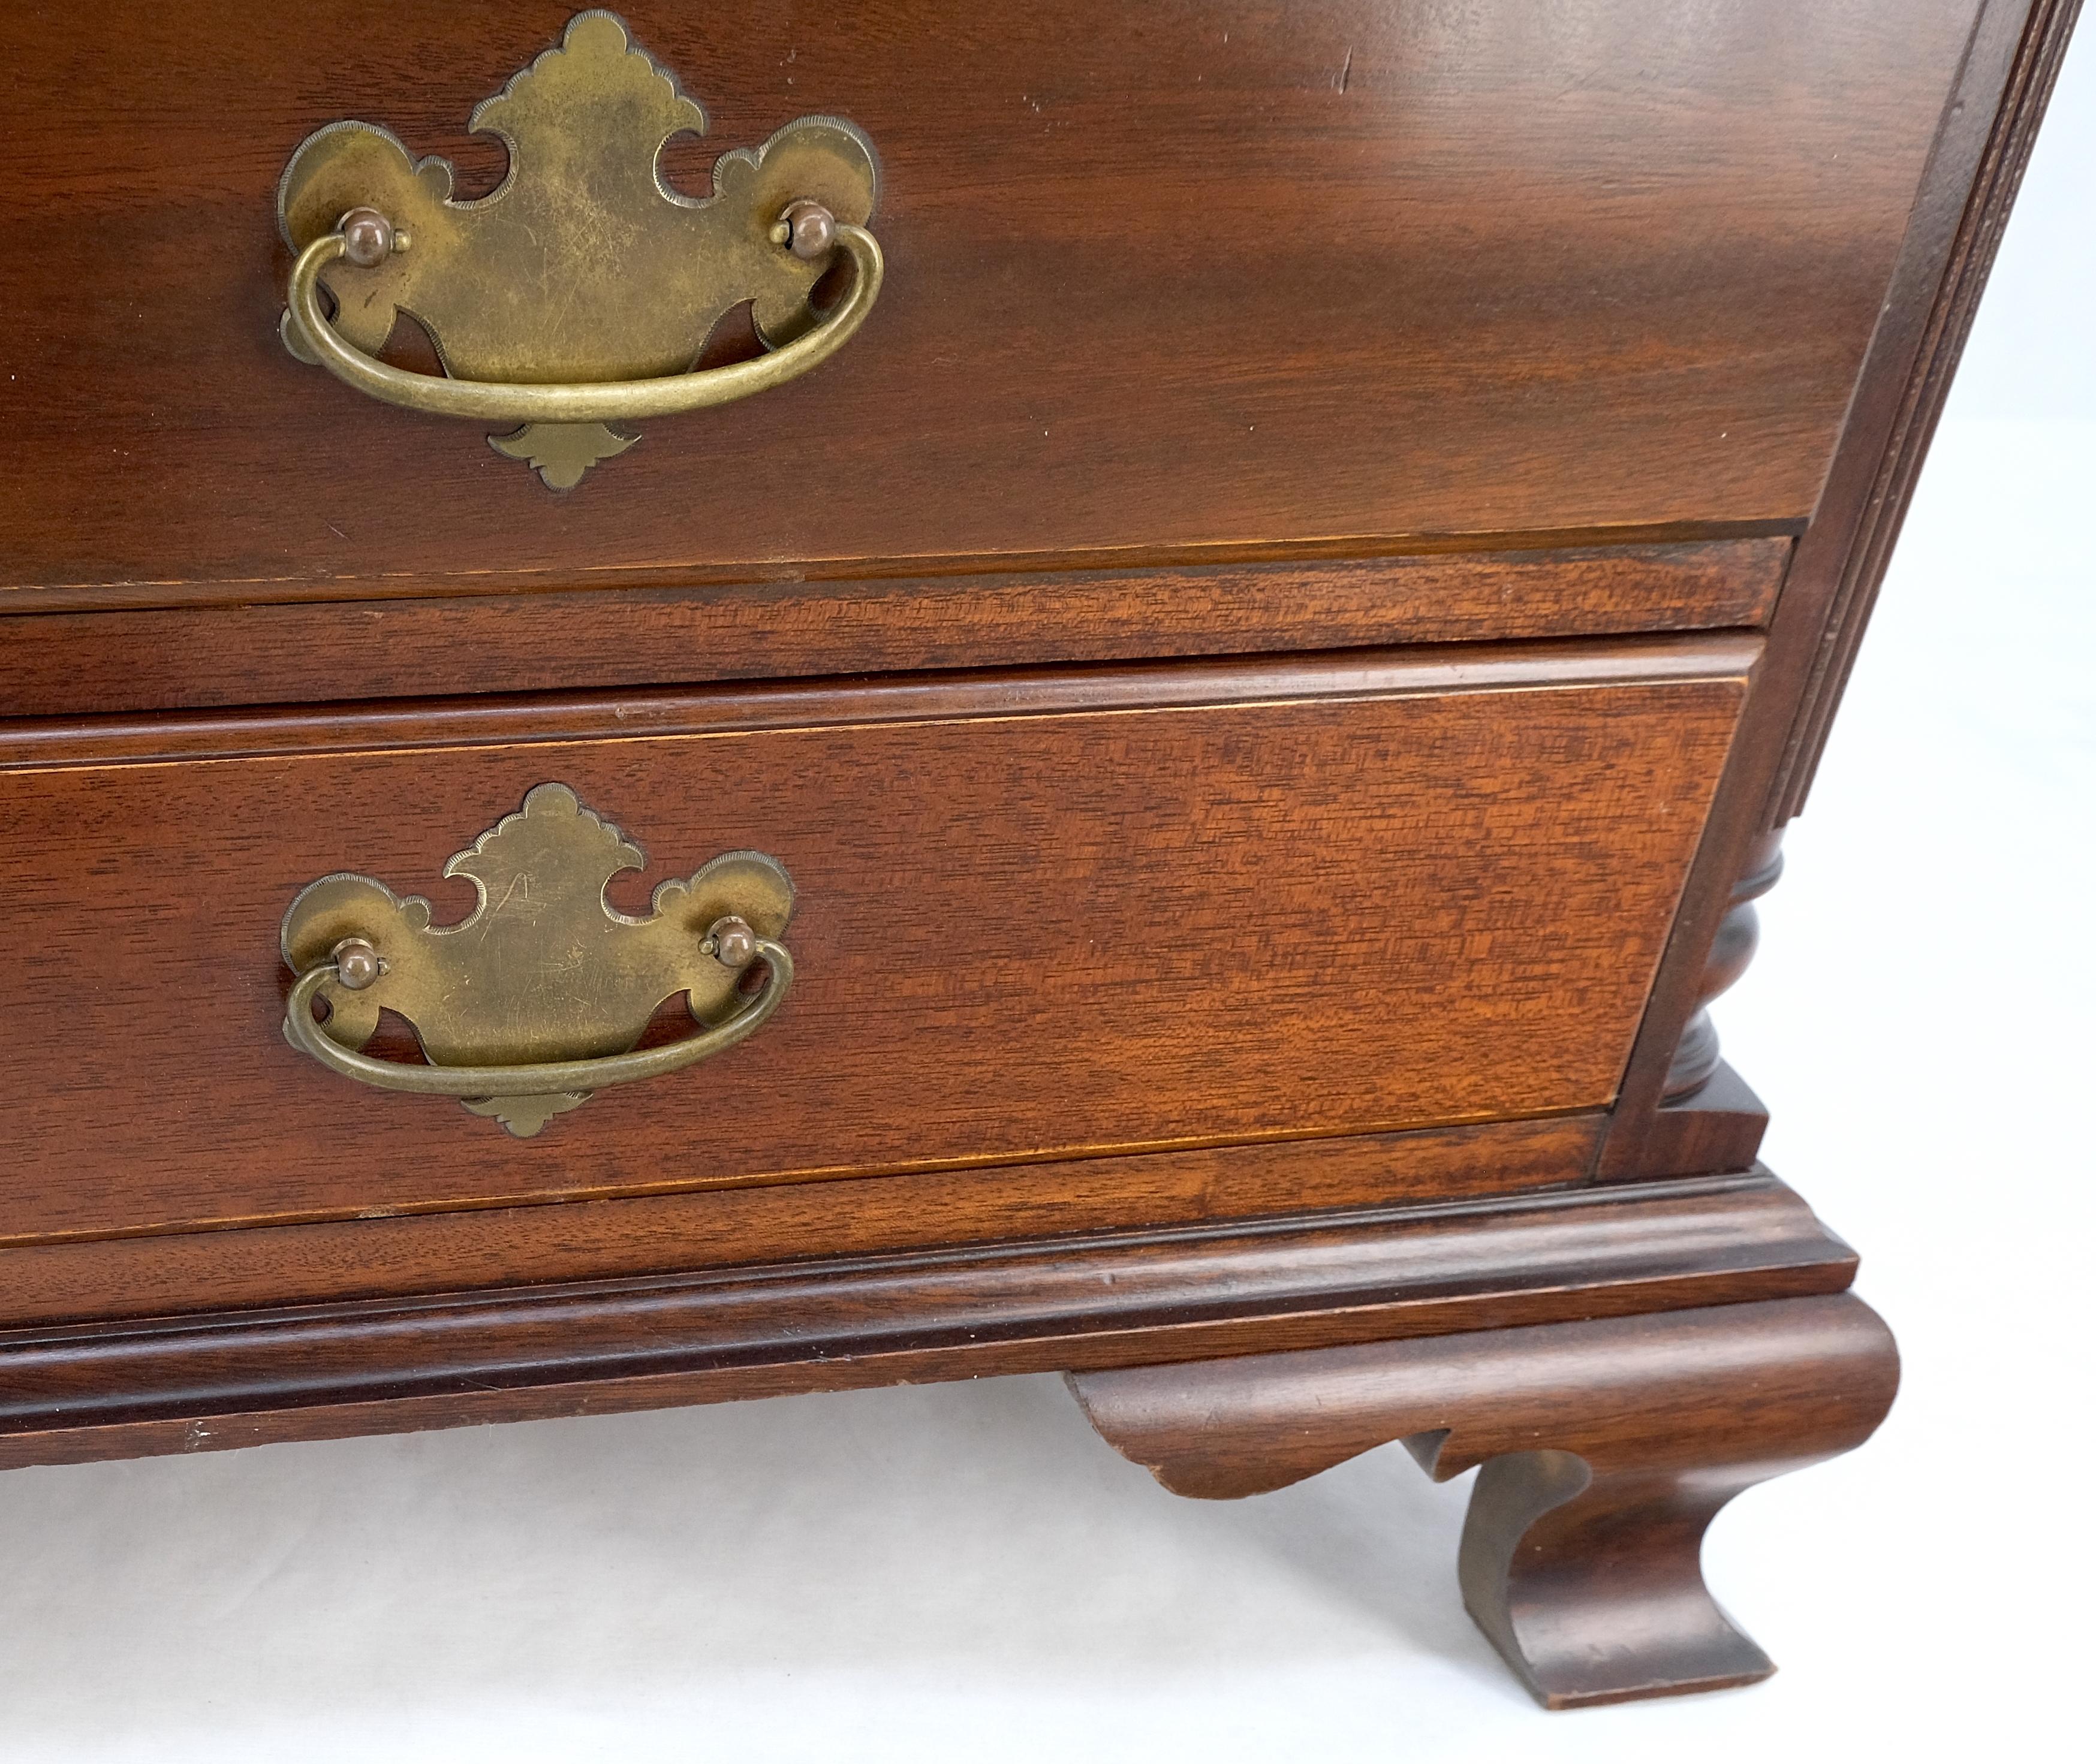 Federal Bracket Feet Mahogany 6 Drawers Brass Pulls Tall Lingerie Chest Dresser Cabinet For Sale